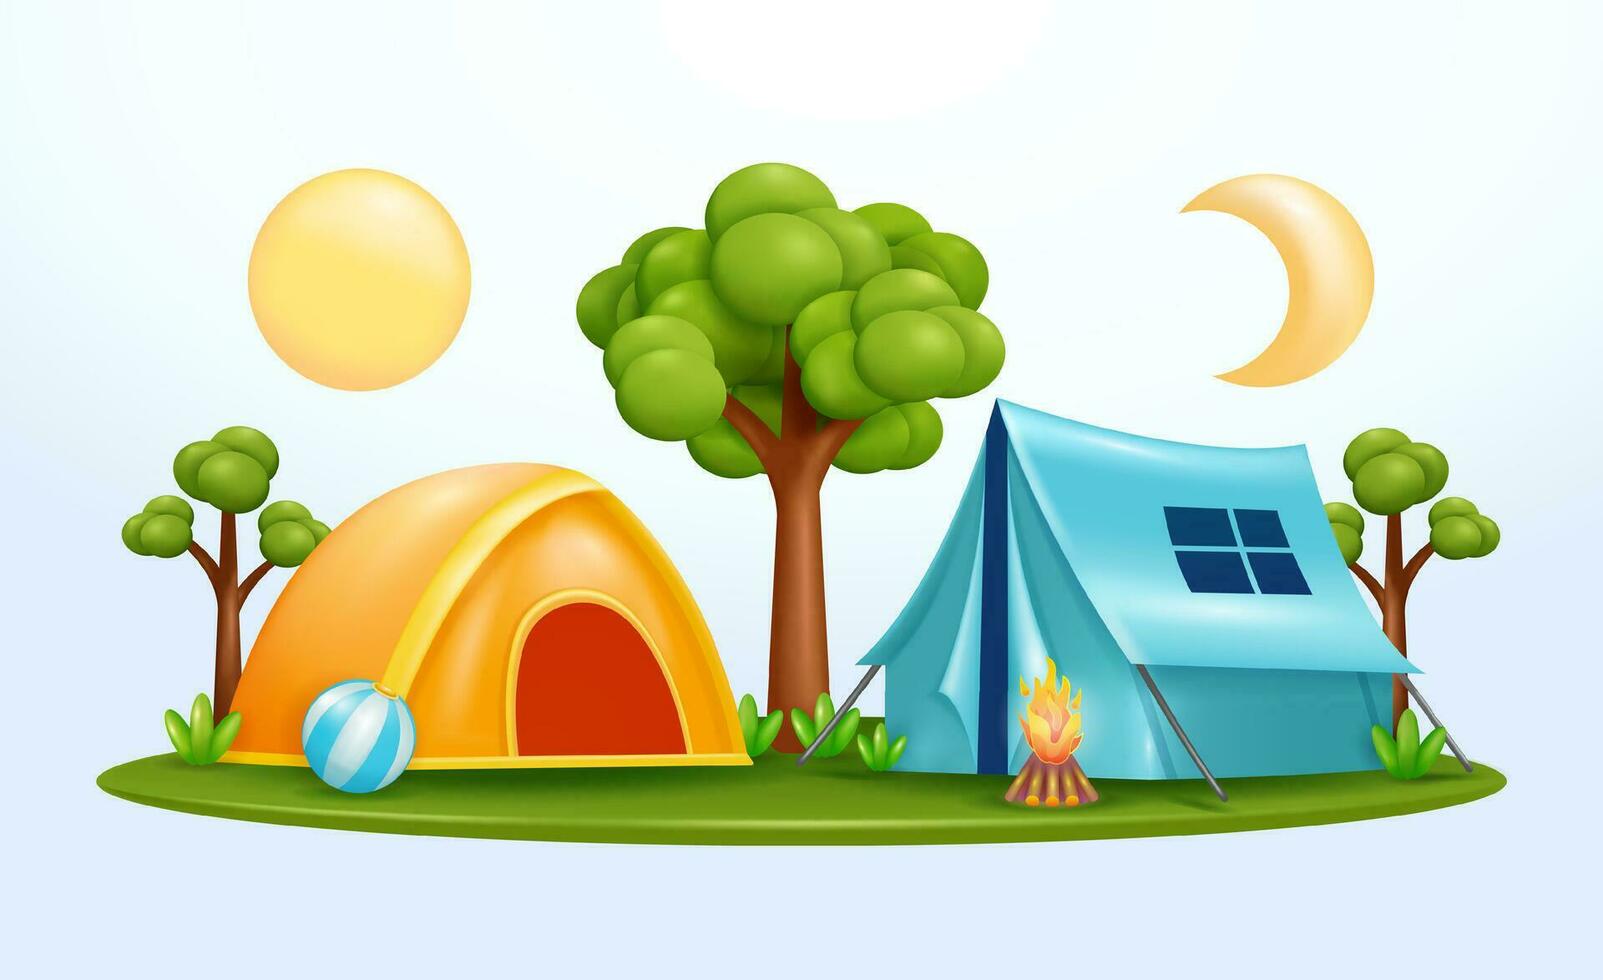 Camping in the forest. Pair of tents camping in forest with campfire, trees, ball, day and night changes. 3d vector suitable for banners, posters, websites and social media